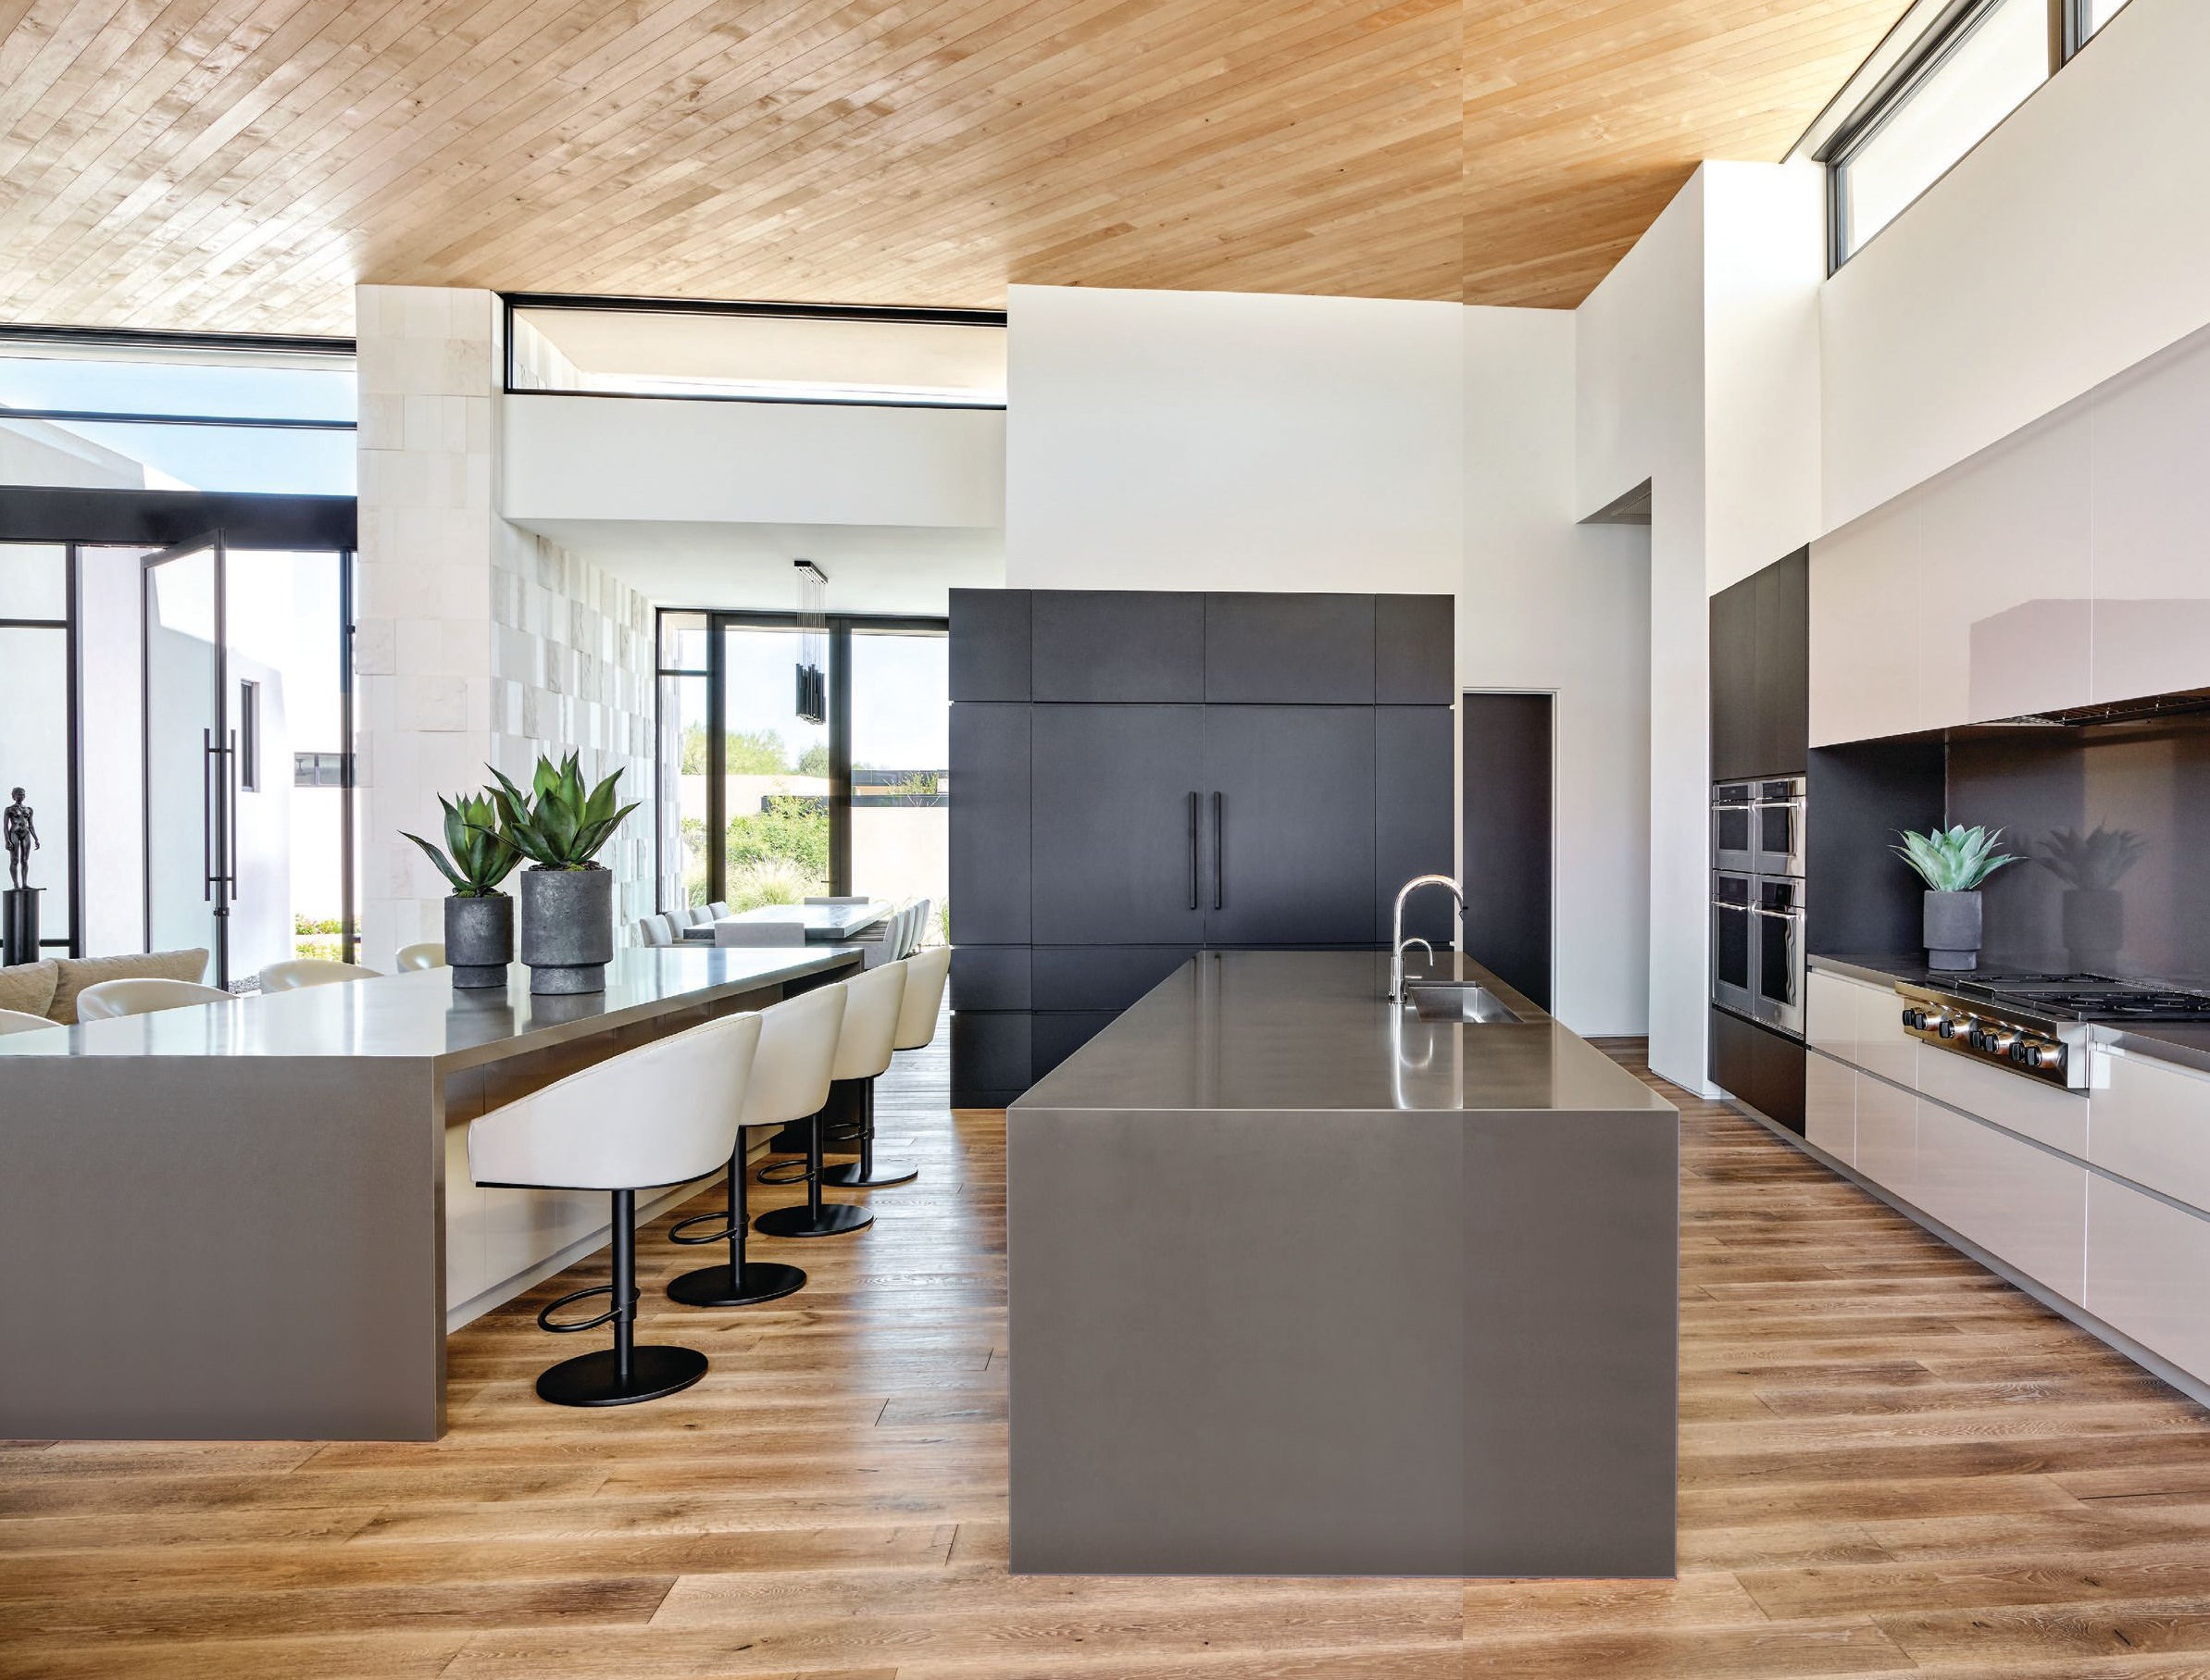 Ownby kept function top of mind for this minimalist kitchen, which features cabinets from Distinctive Custom Cabinetry, appliances from Sub-Zero and Wolf, and Duchateau Riverstone flooring PHOTOGRAPHED BY WERNER SEGARRA